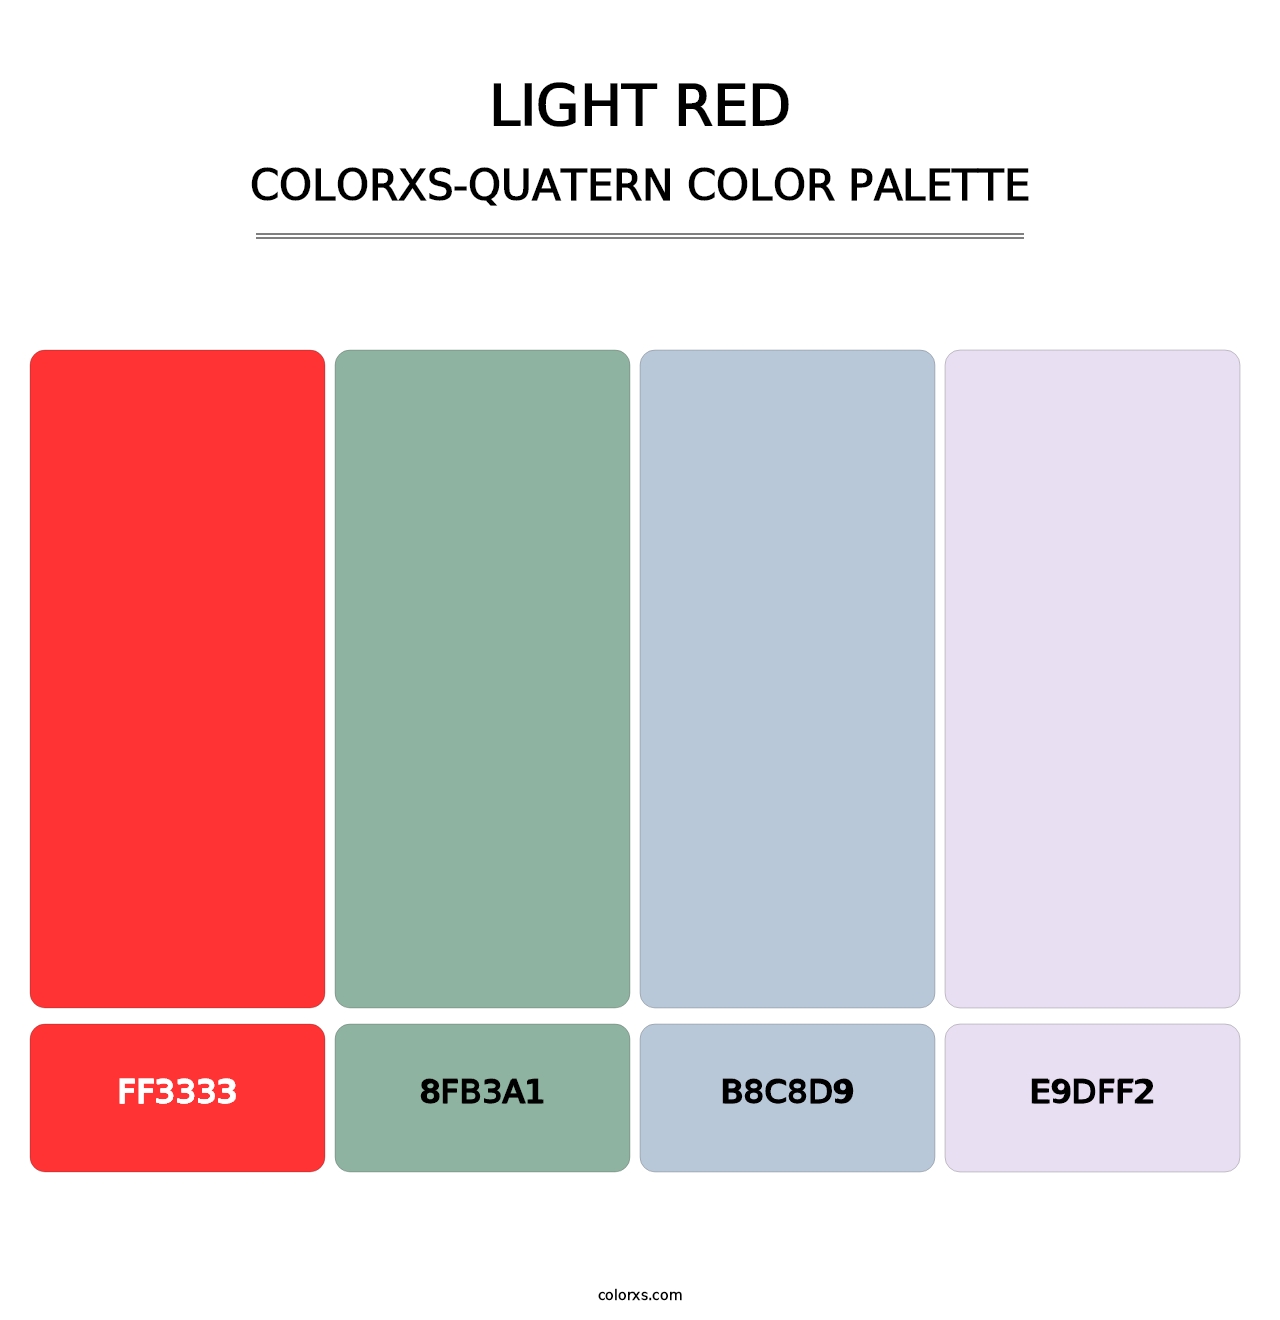 Light Red - Colorxs Quatern Palette